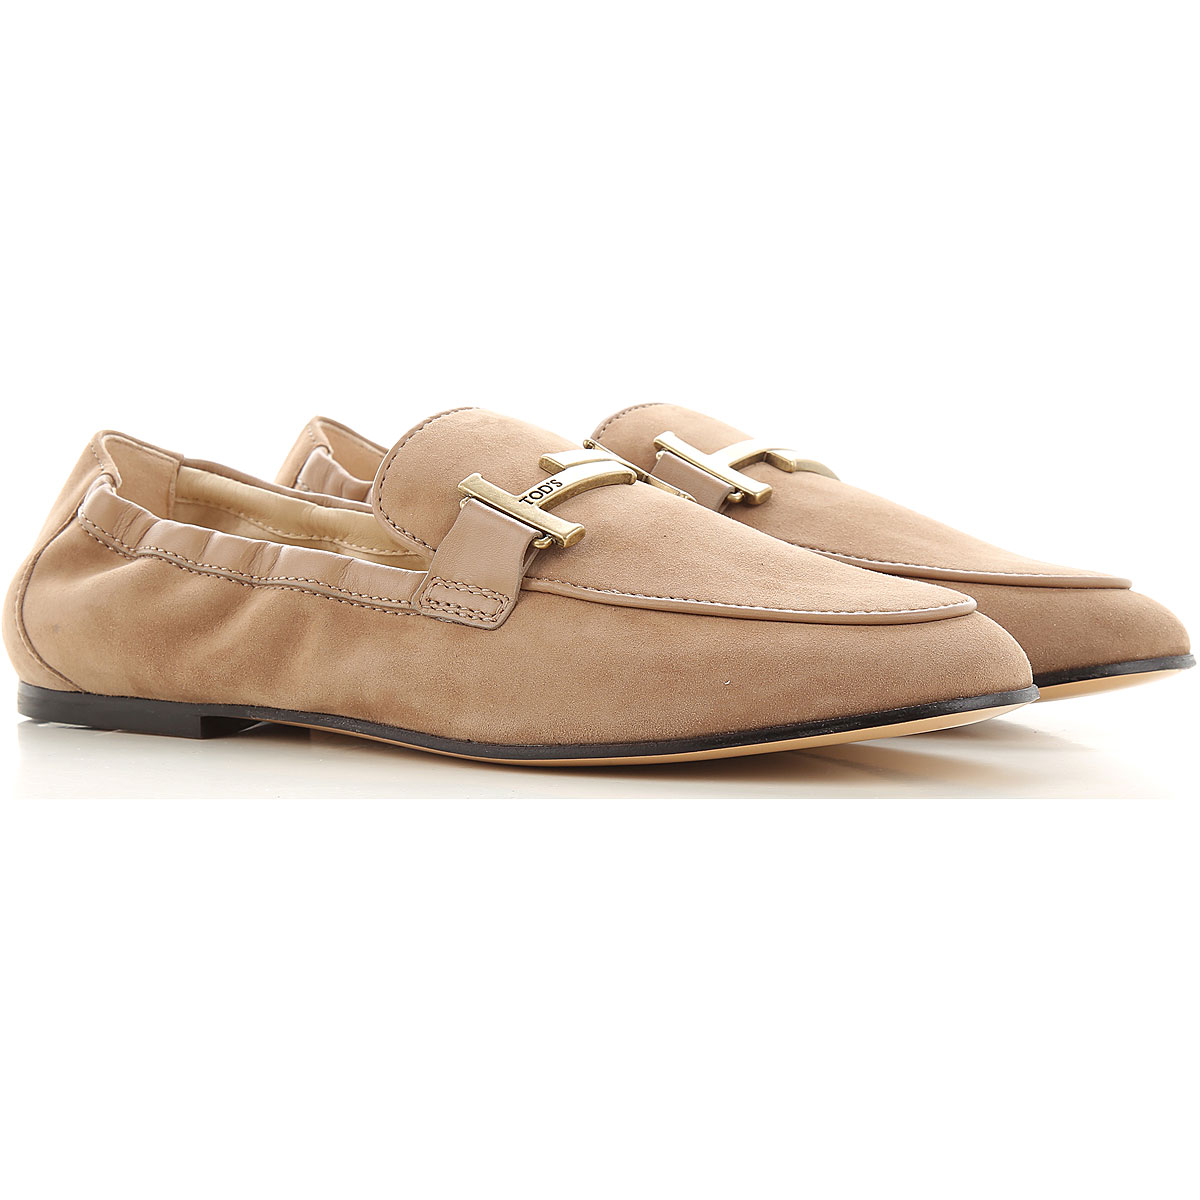 Womens Shoes Tods, Style code: xxw79a0de70d8wc806--